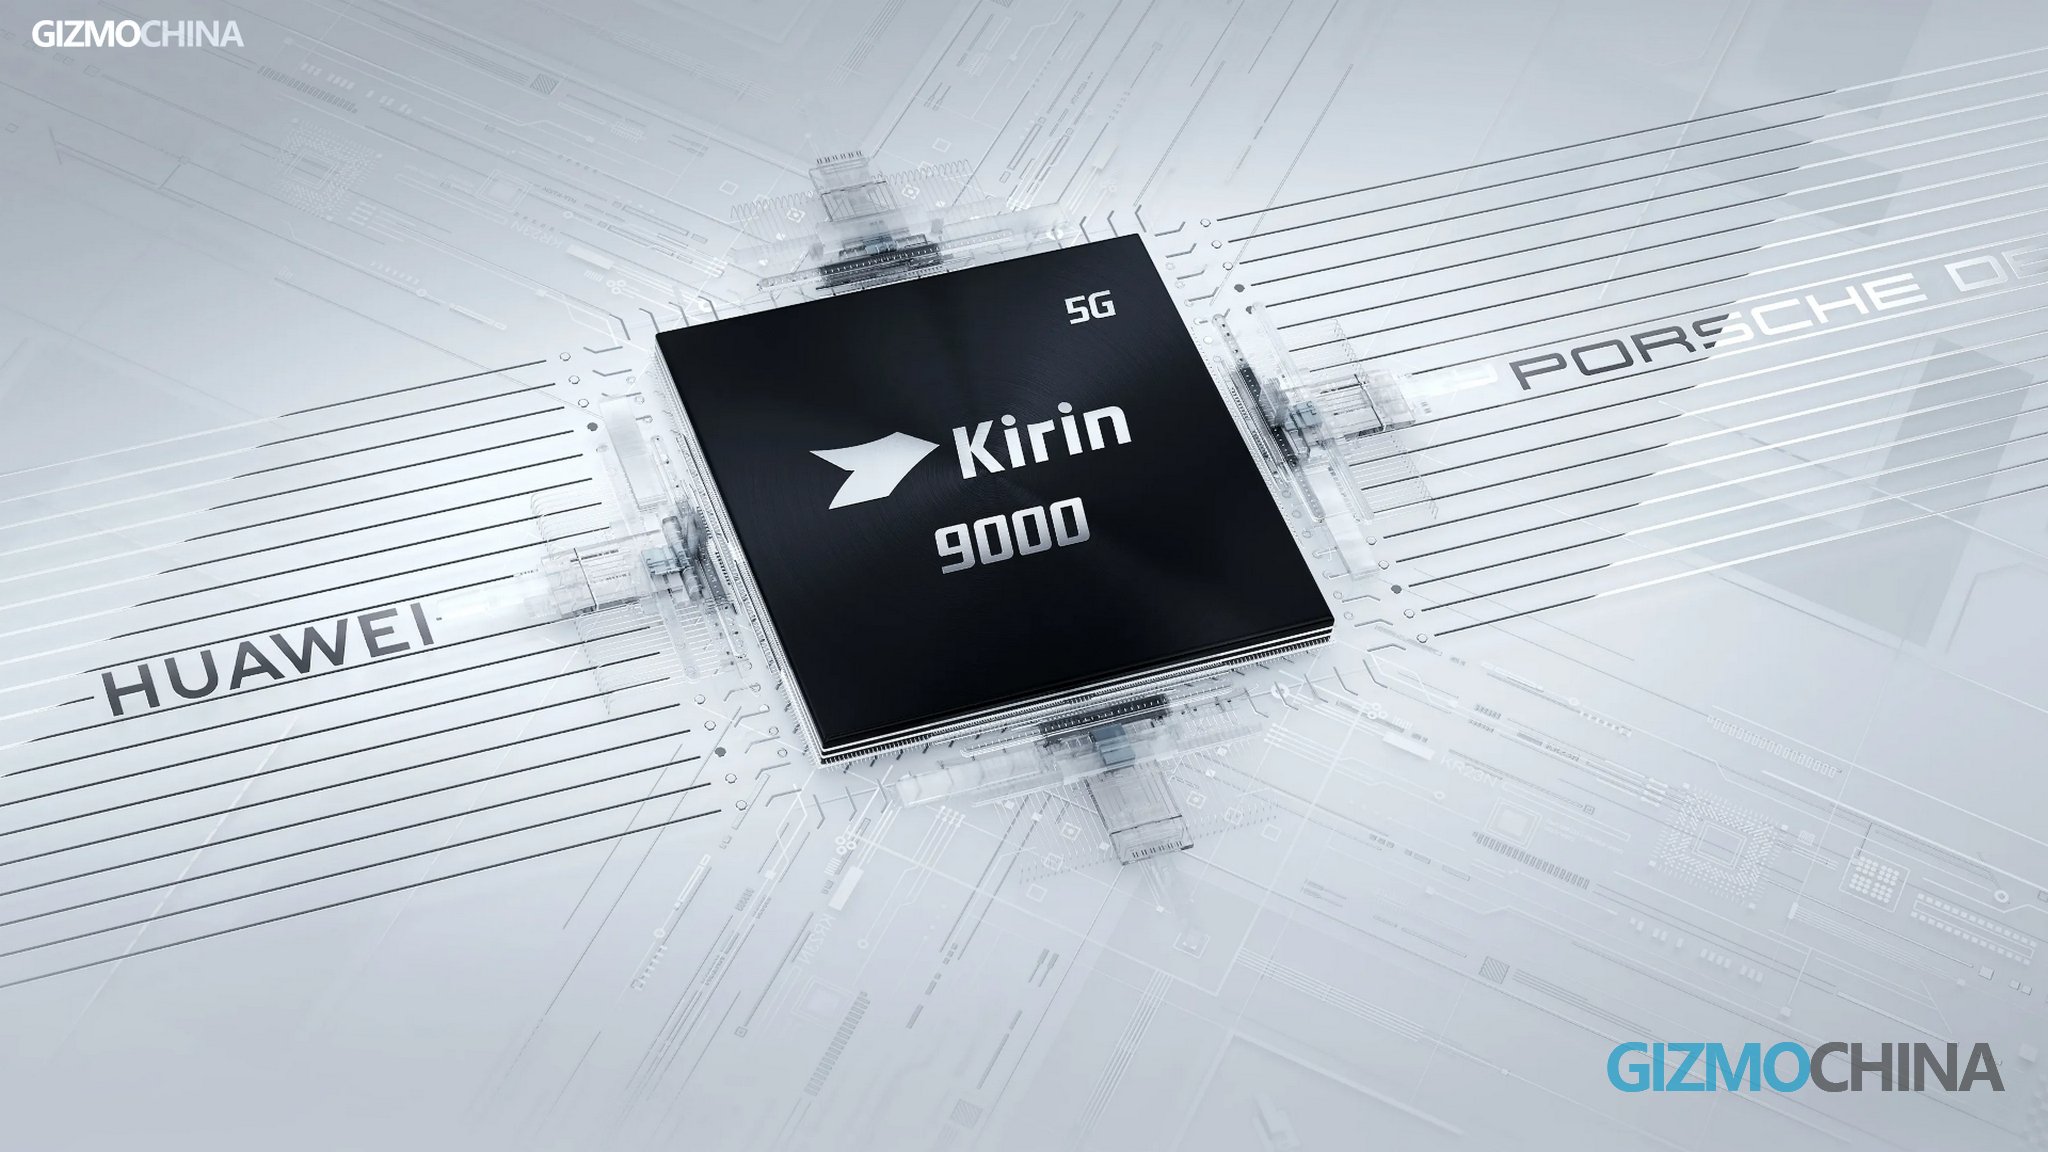 Huawei has reserved Kirin 9000 chips for P50 and Mate 50 series smartphones